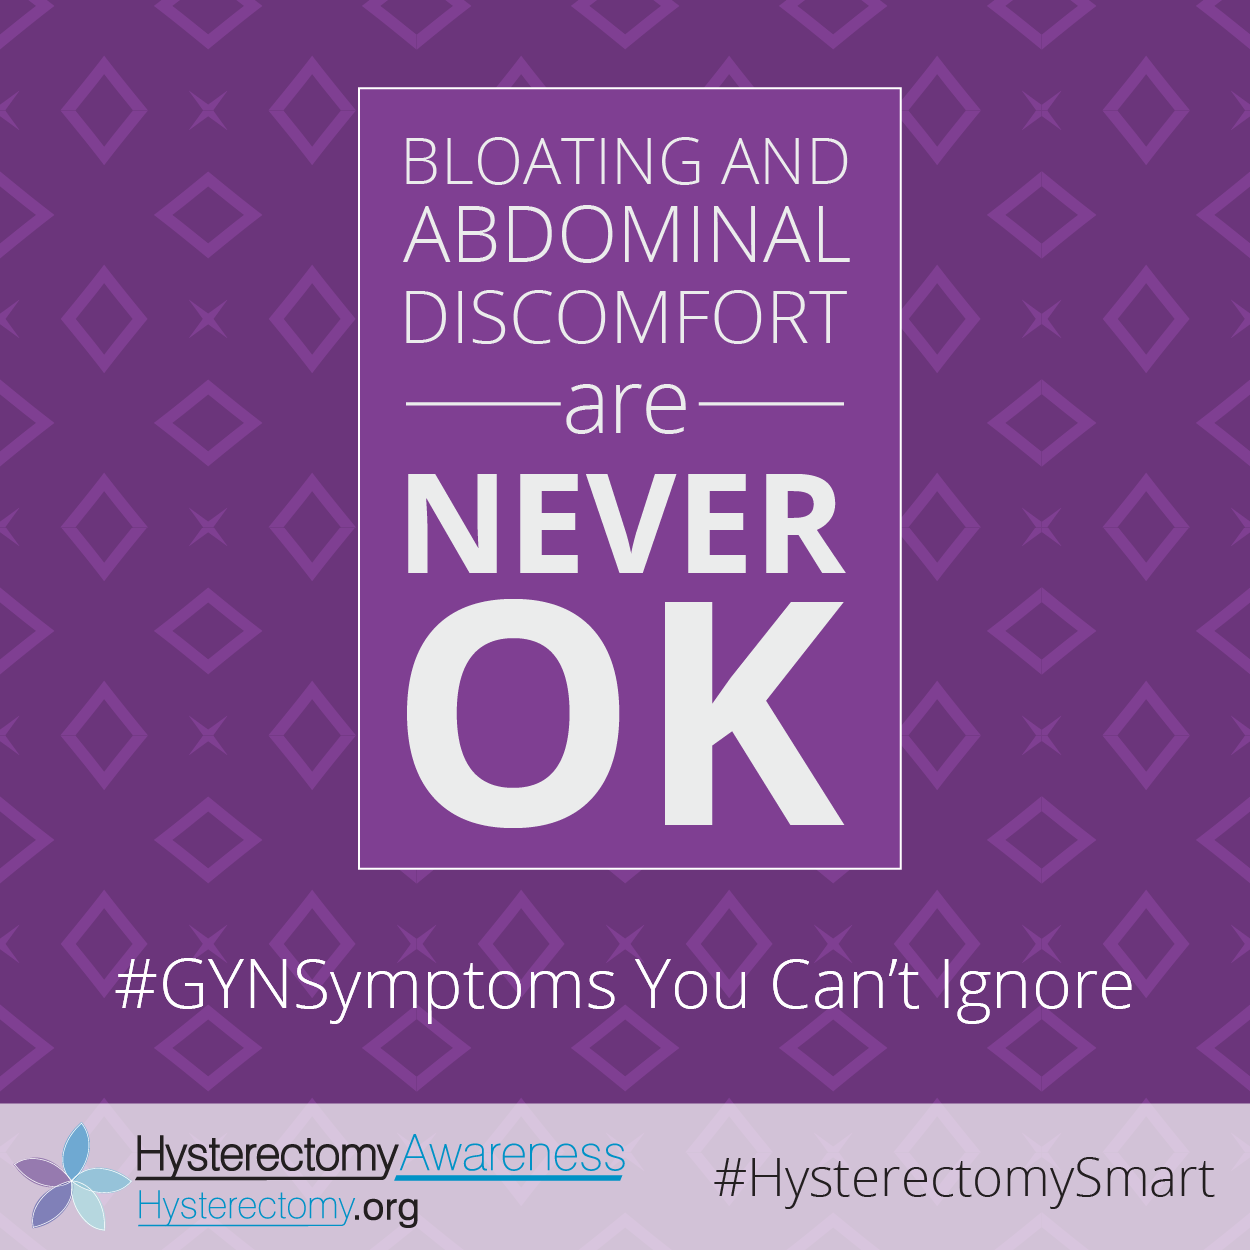 Bloating & Abdominal Discomfort are NEVER OK #GYNSymptoms You Can’t Ignore #HysterectomySmart